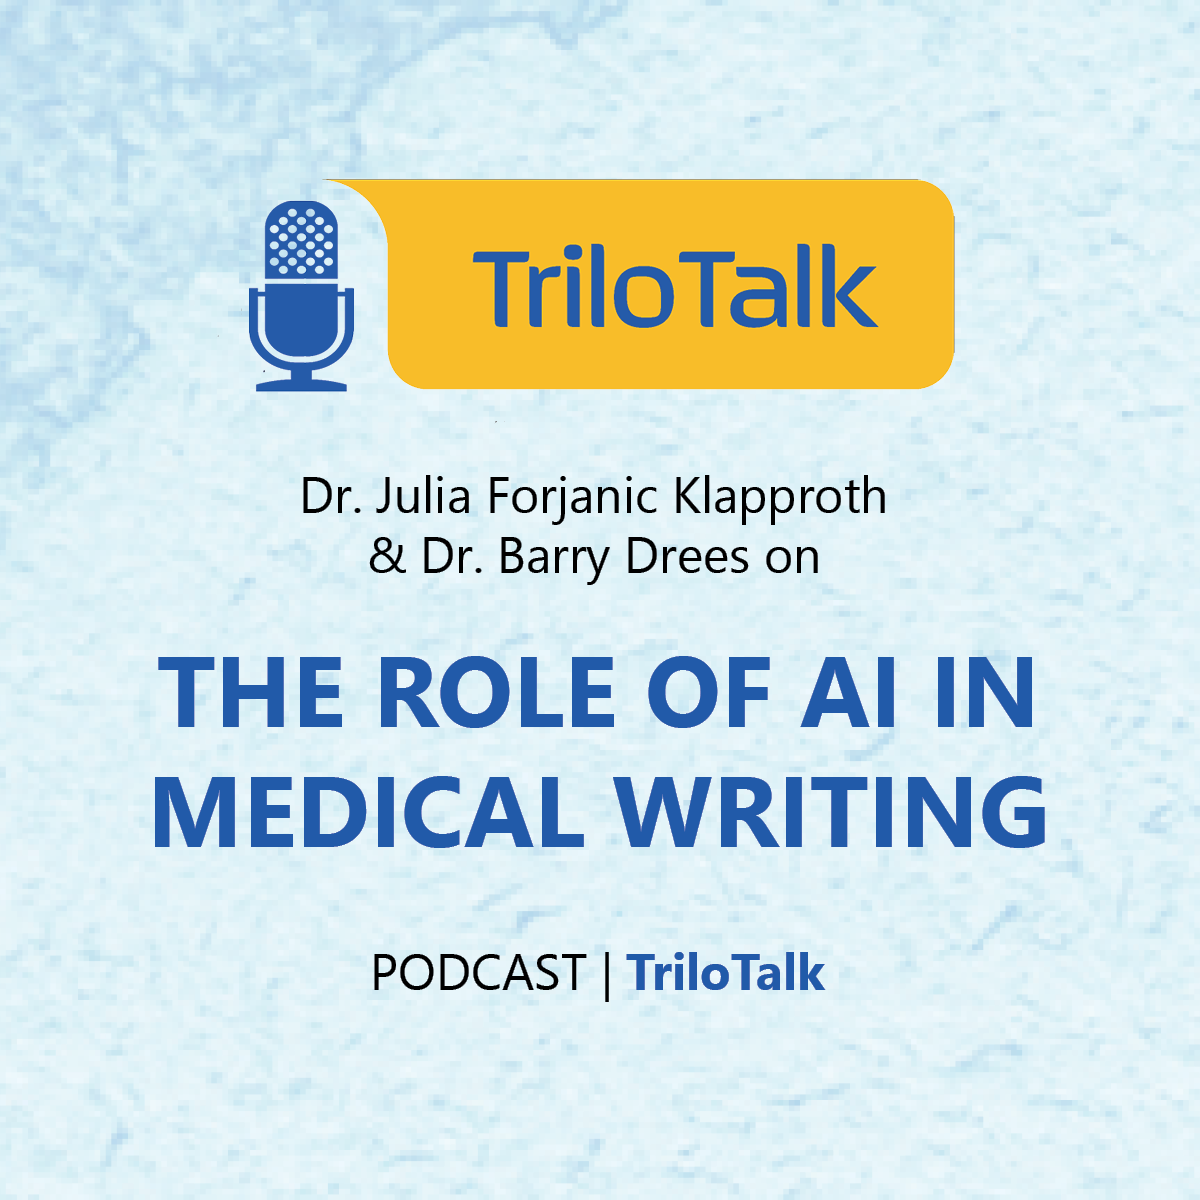 The Role of AI in Medical Writing